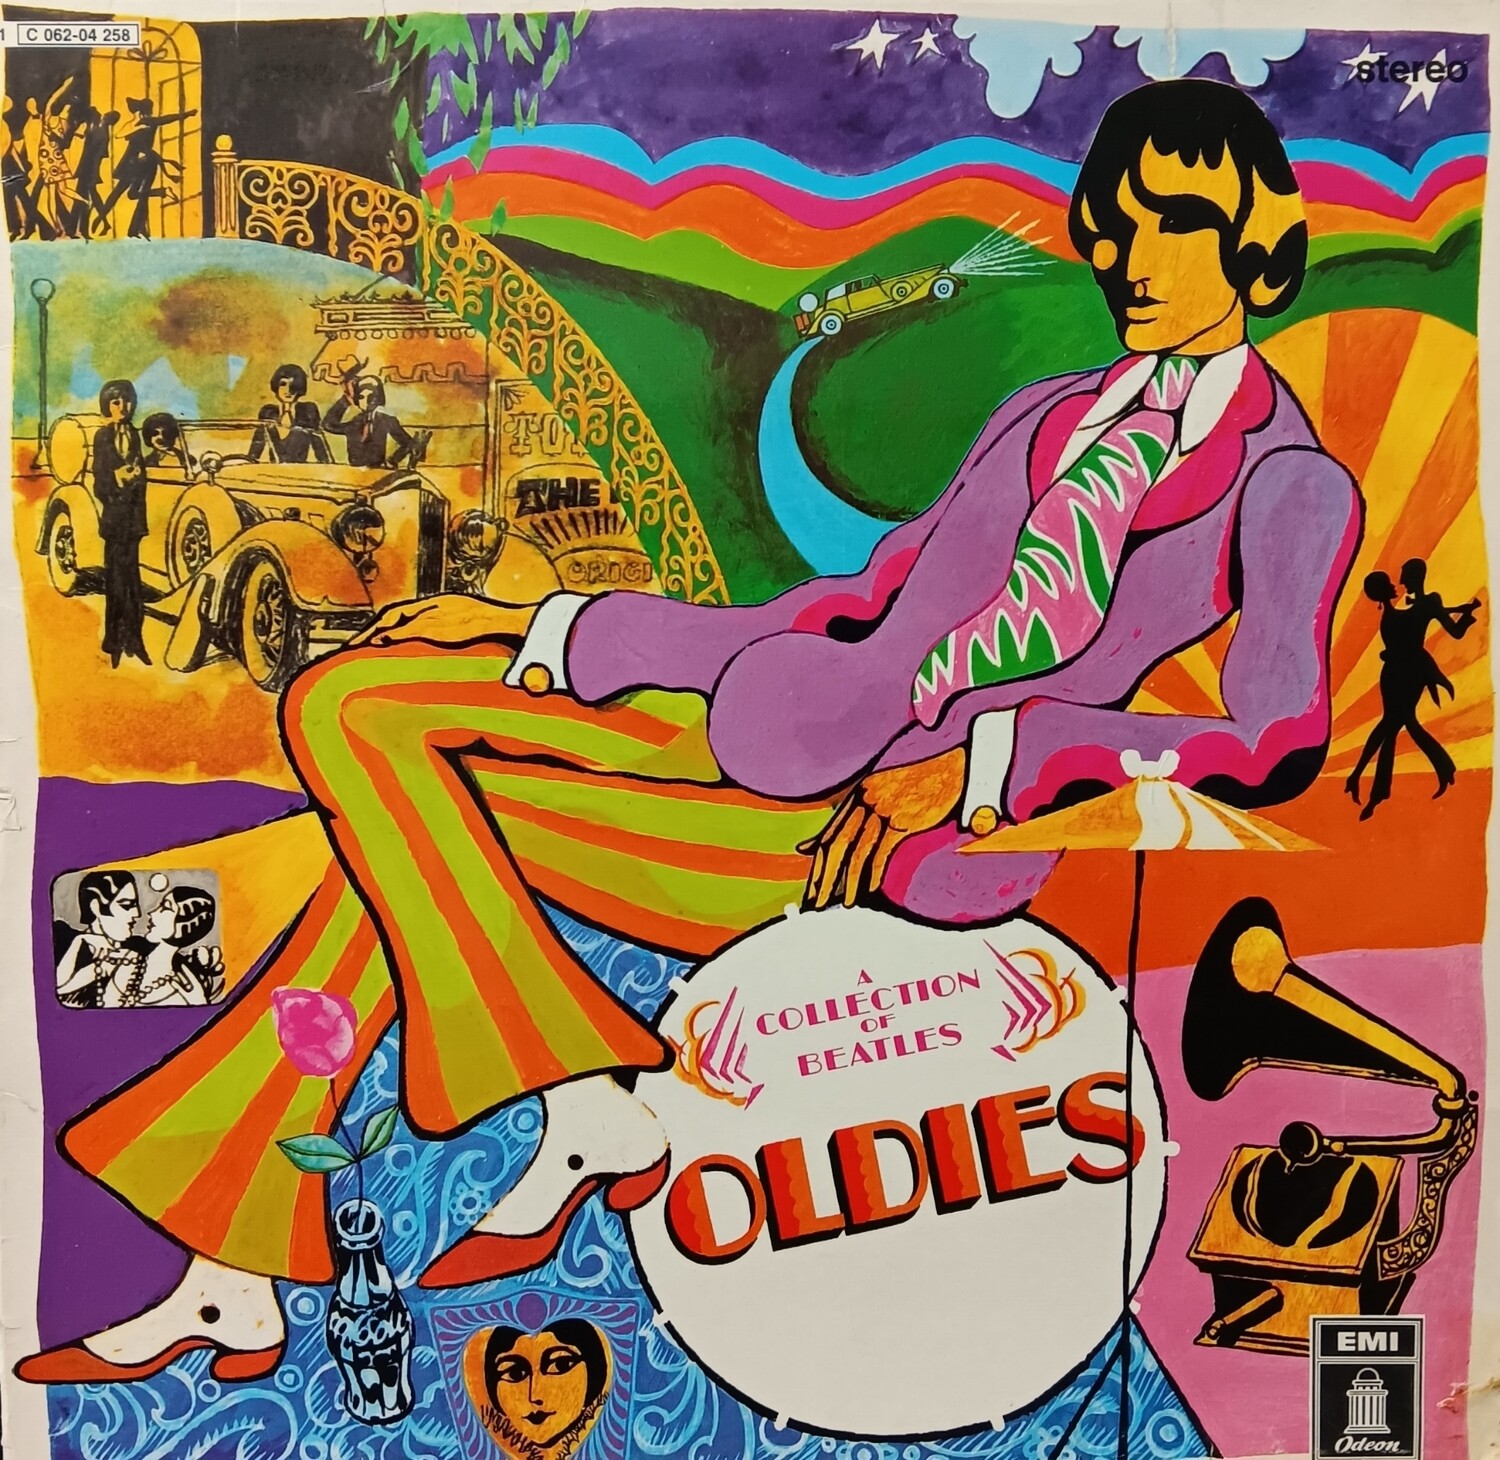 THE BEATLES - A collection of Beatles oldies